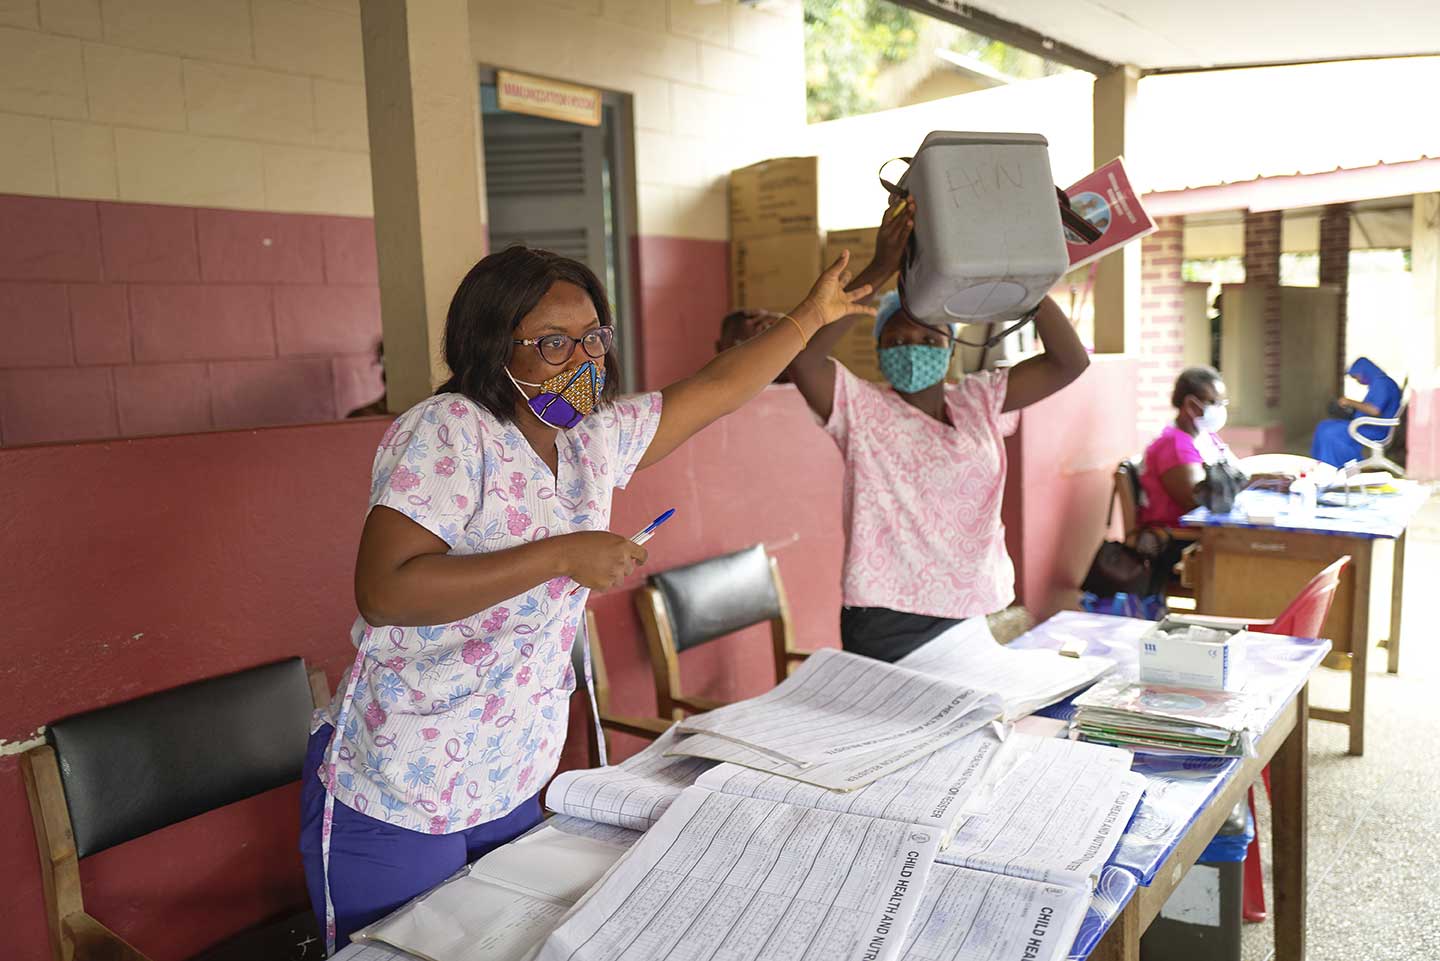 Priscilla Baffoe, the Principal Community Health Nurse at the Maternal and Child Health Hospital in Kumasi, Ashanti Region, speaking to mothers about the upcoming house-to-house visits for the polio vaccination campaign on 8 September 2020. ©UNICEF/ACQUAH